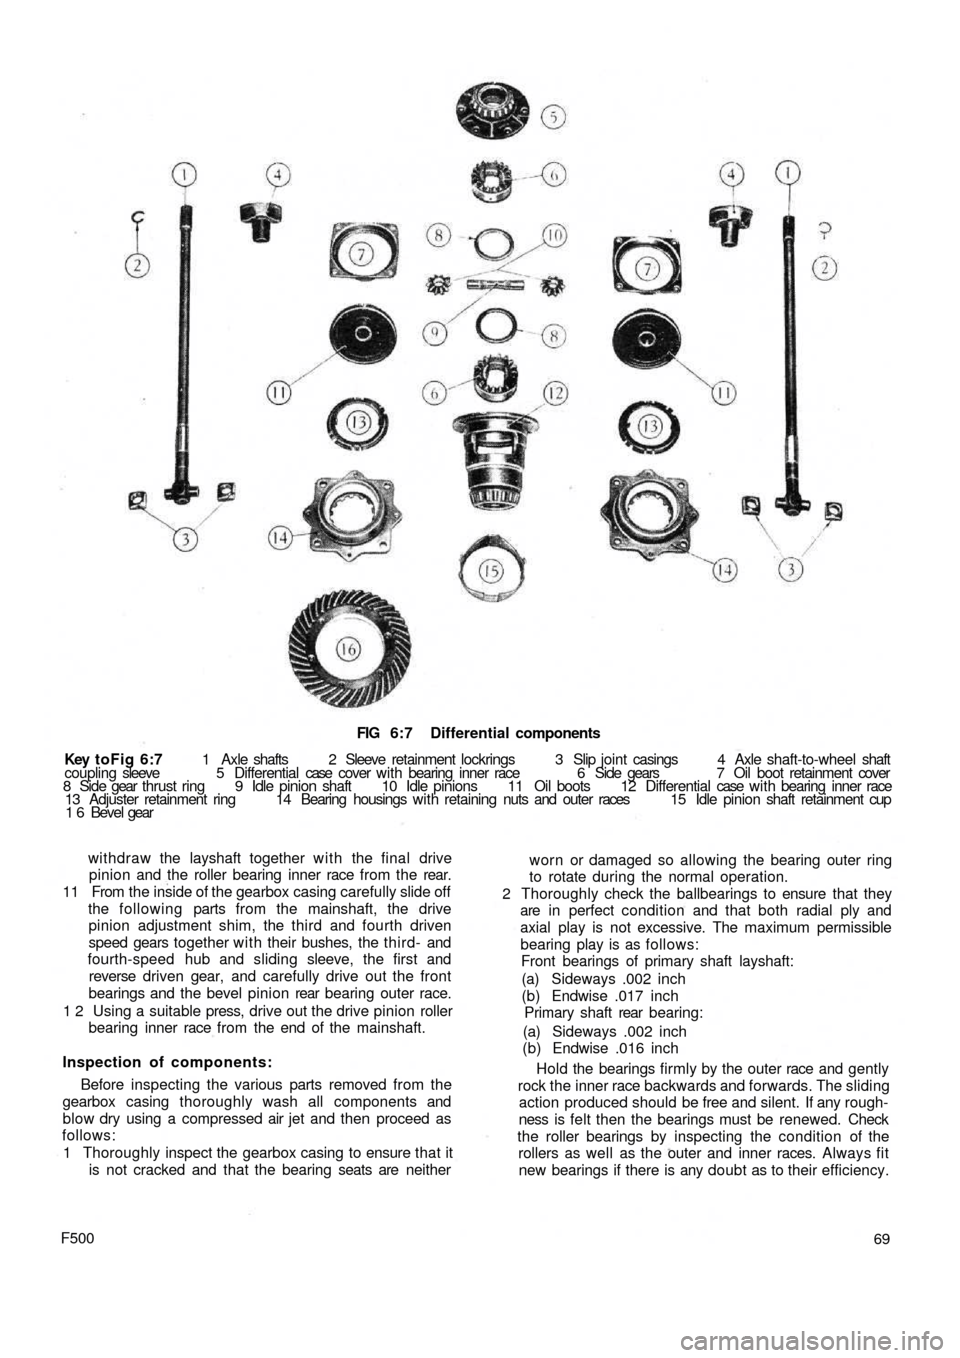 FIAT 500 1960 1.G Workshop Manual FIG 6:7  Differential components
Key toFig  6:7 1  Axle  shafts  2  Sleeve  retainment  lockrings   3   Slip  joint casings  4  Axle  shaft-to-wheel shaft
coupling sleeve  5  Differential case  cover 